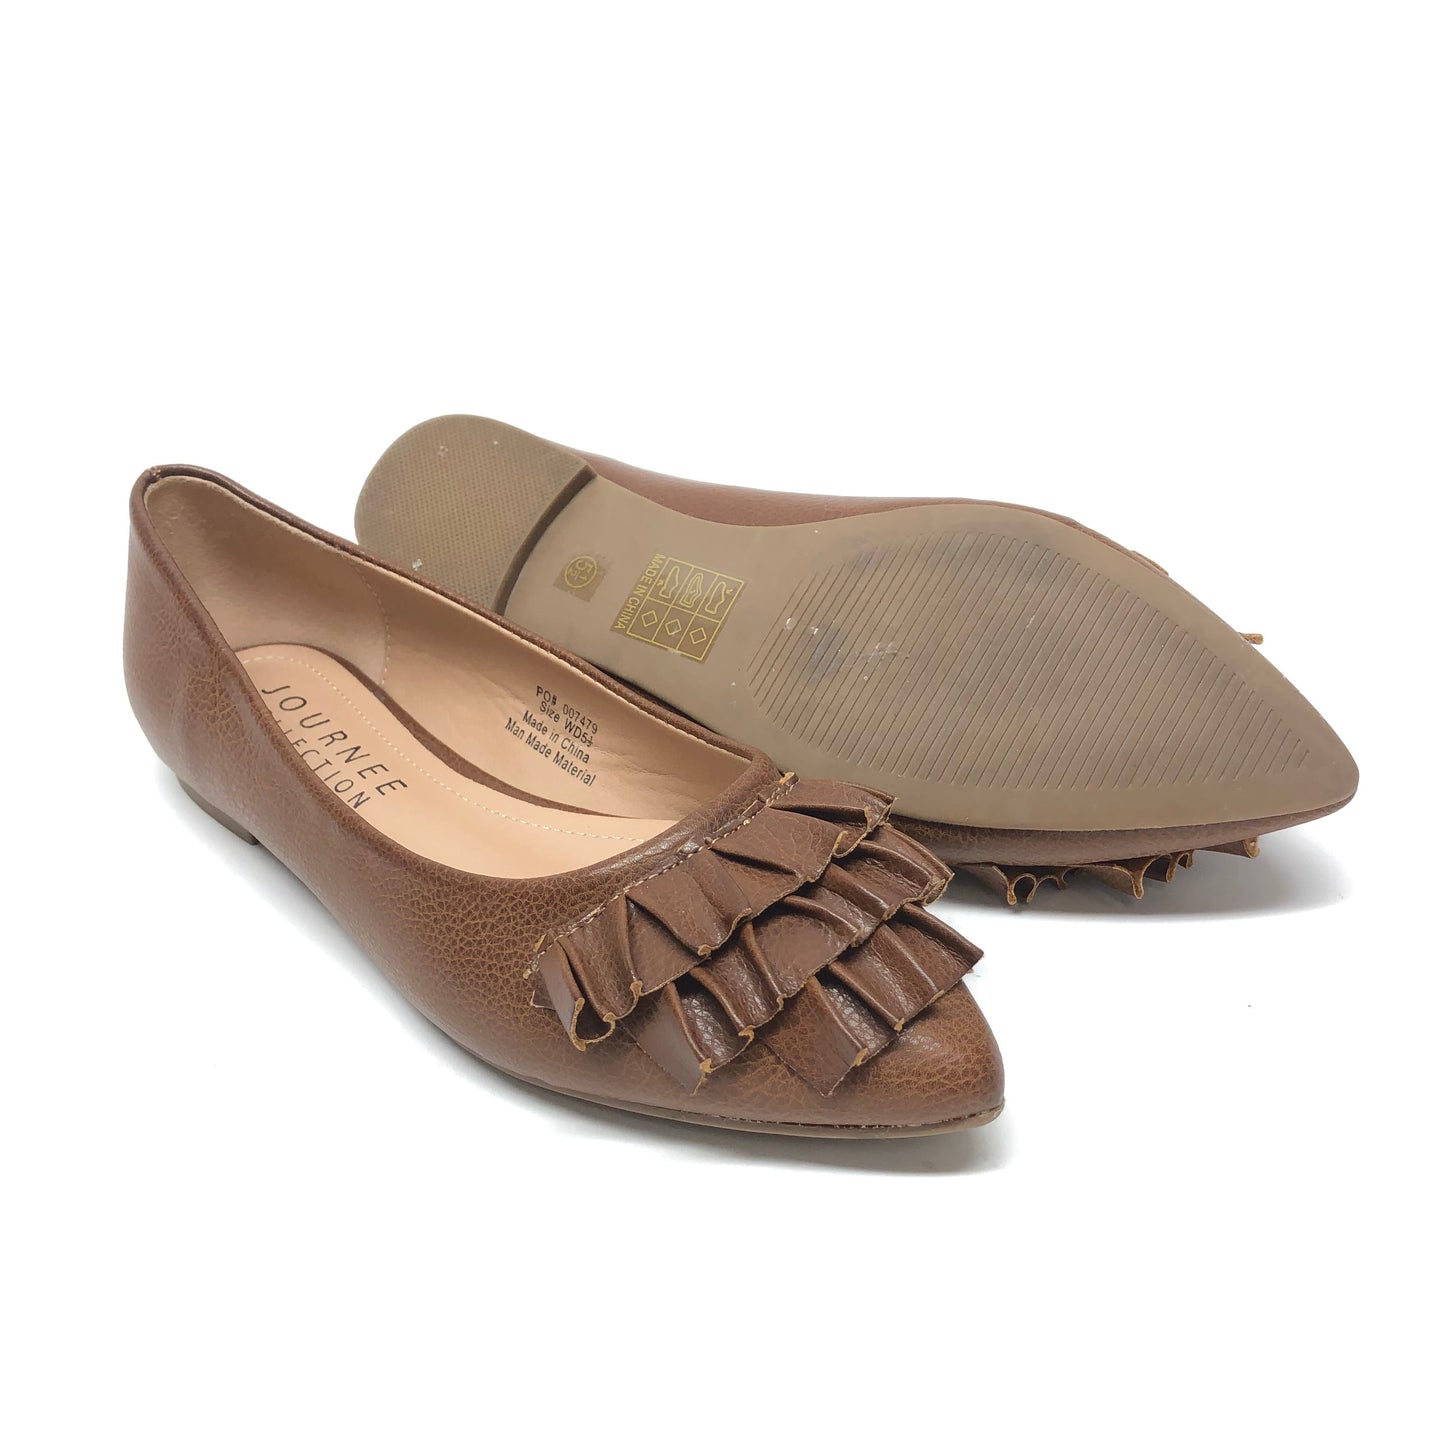 Shoes Flats Ballet By Journee  Size: 5.5